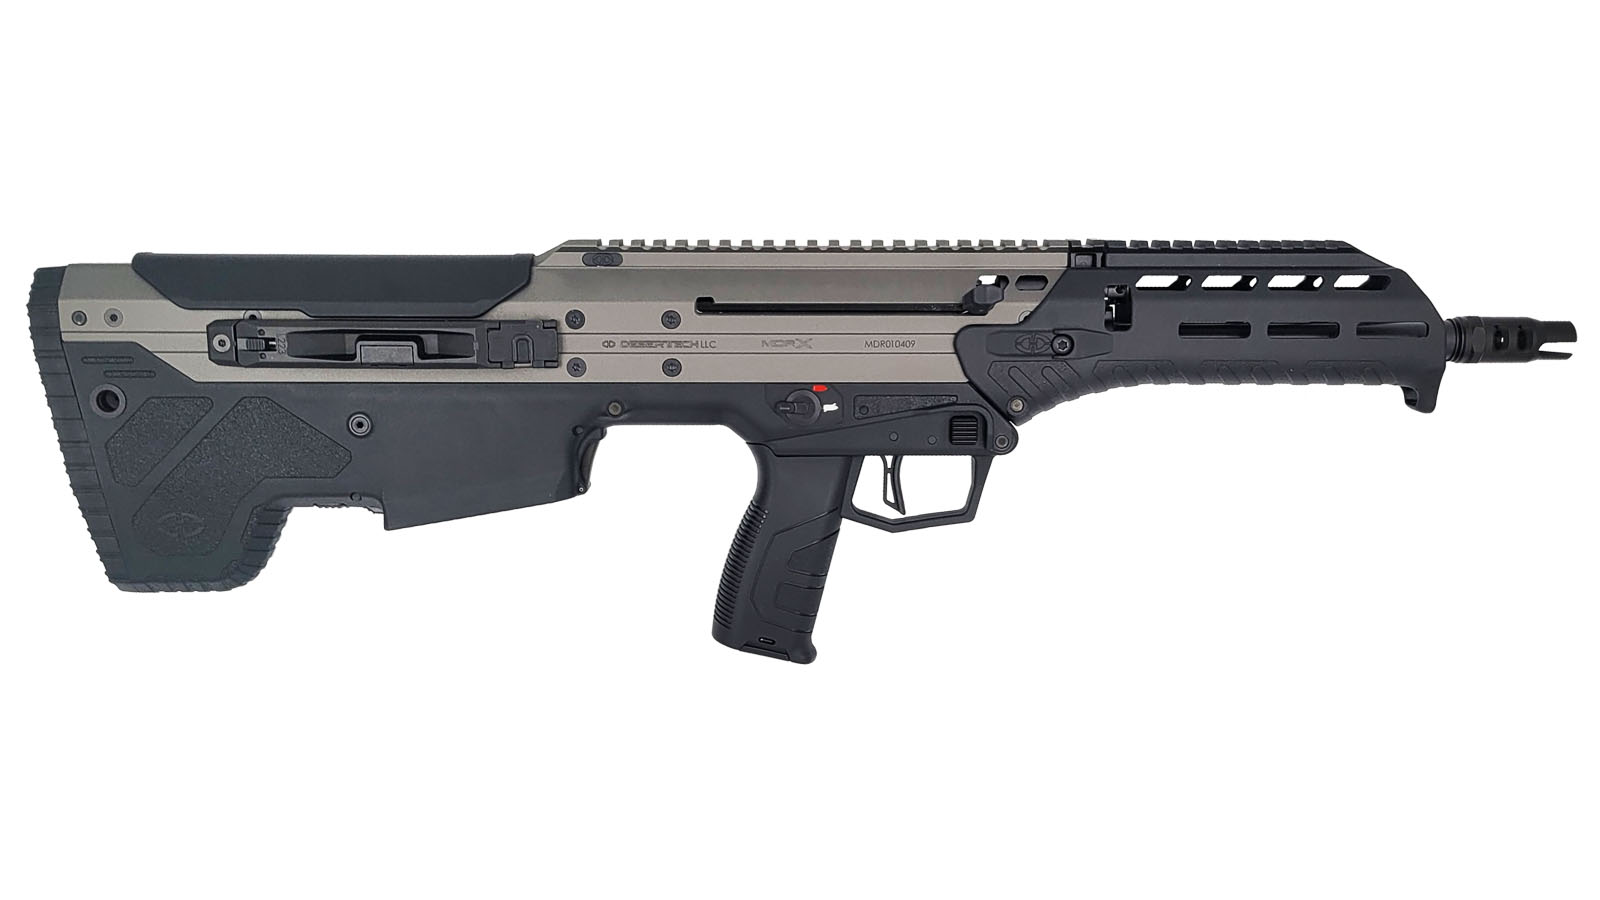 MDRx Rifle, 556NATO 223Rem 16" 30rd Forward-Ejection Tungsten